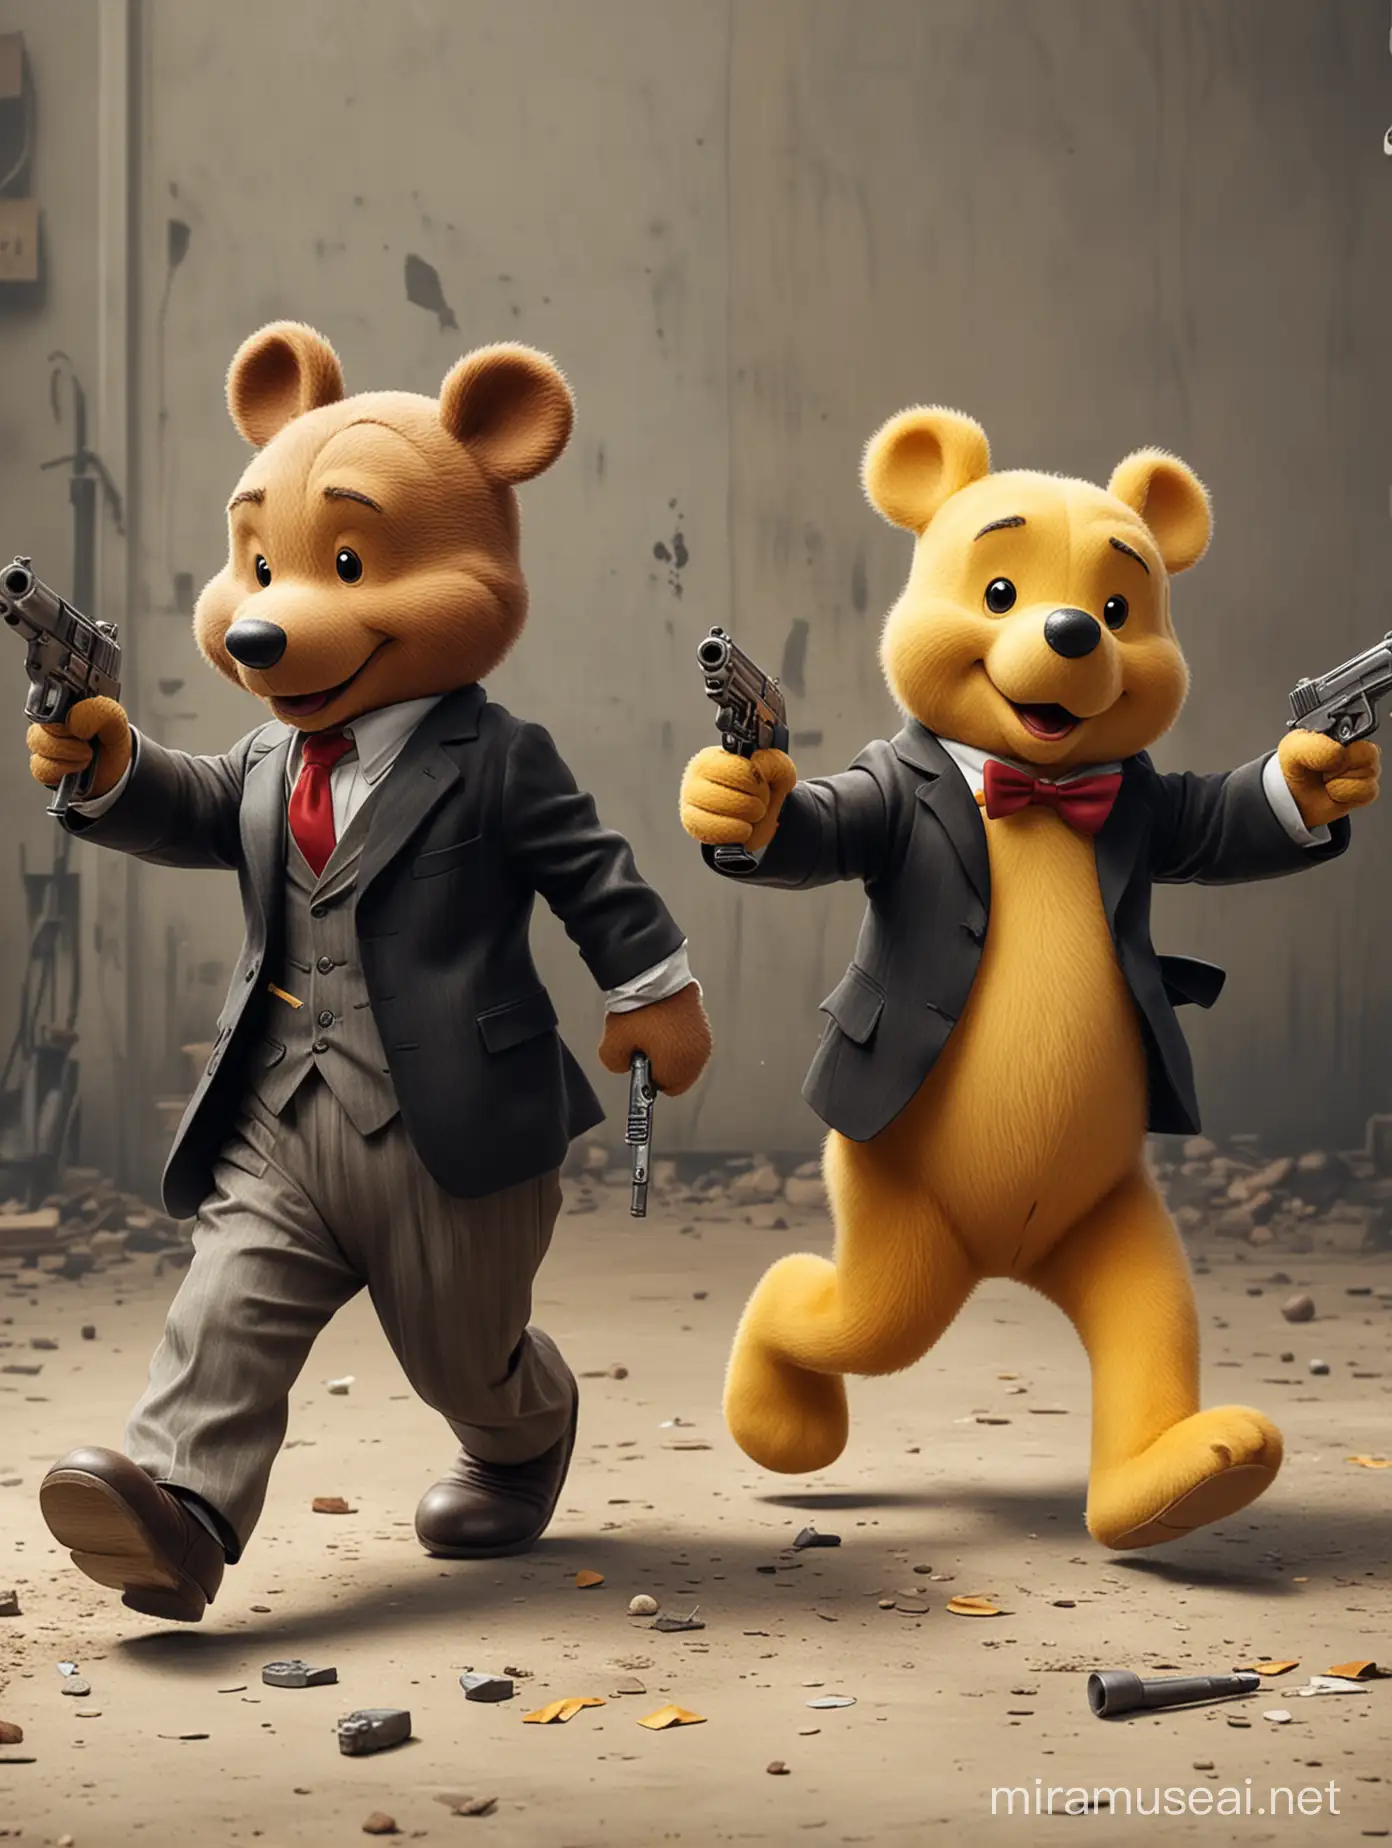 Create a scene two person depicting Mickey Mouse and  Winnie the Pooh in elegant suits, running out after bank rubbery 
. Winnie the Pooh should be holding a weapon in one hand and a pistol in the other, while Mickey Mouse also holds a pistol. The characters should be clearly visible and feature some distinctive characteristics (such as Winnie the Pooh in his characteristic elegant suit). The background should depict a bank, suggesting a robbery or aftermath of a robbery. The graphic should be in a horizontal 3:4 format and be of high quality to ensure clear and readable details